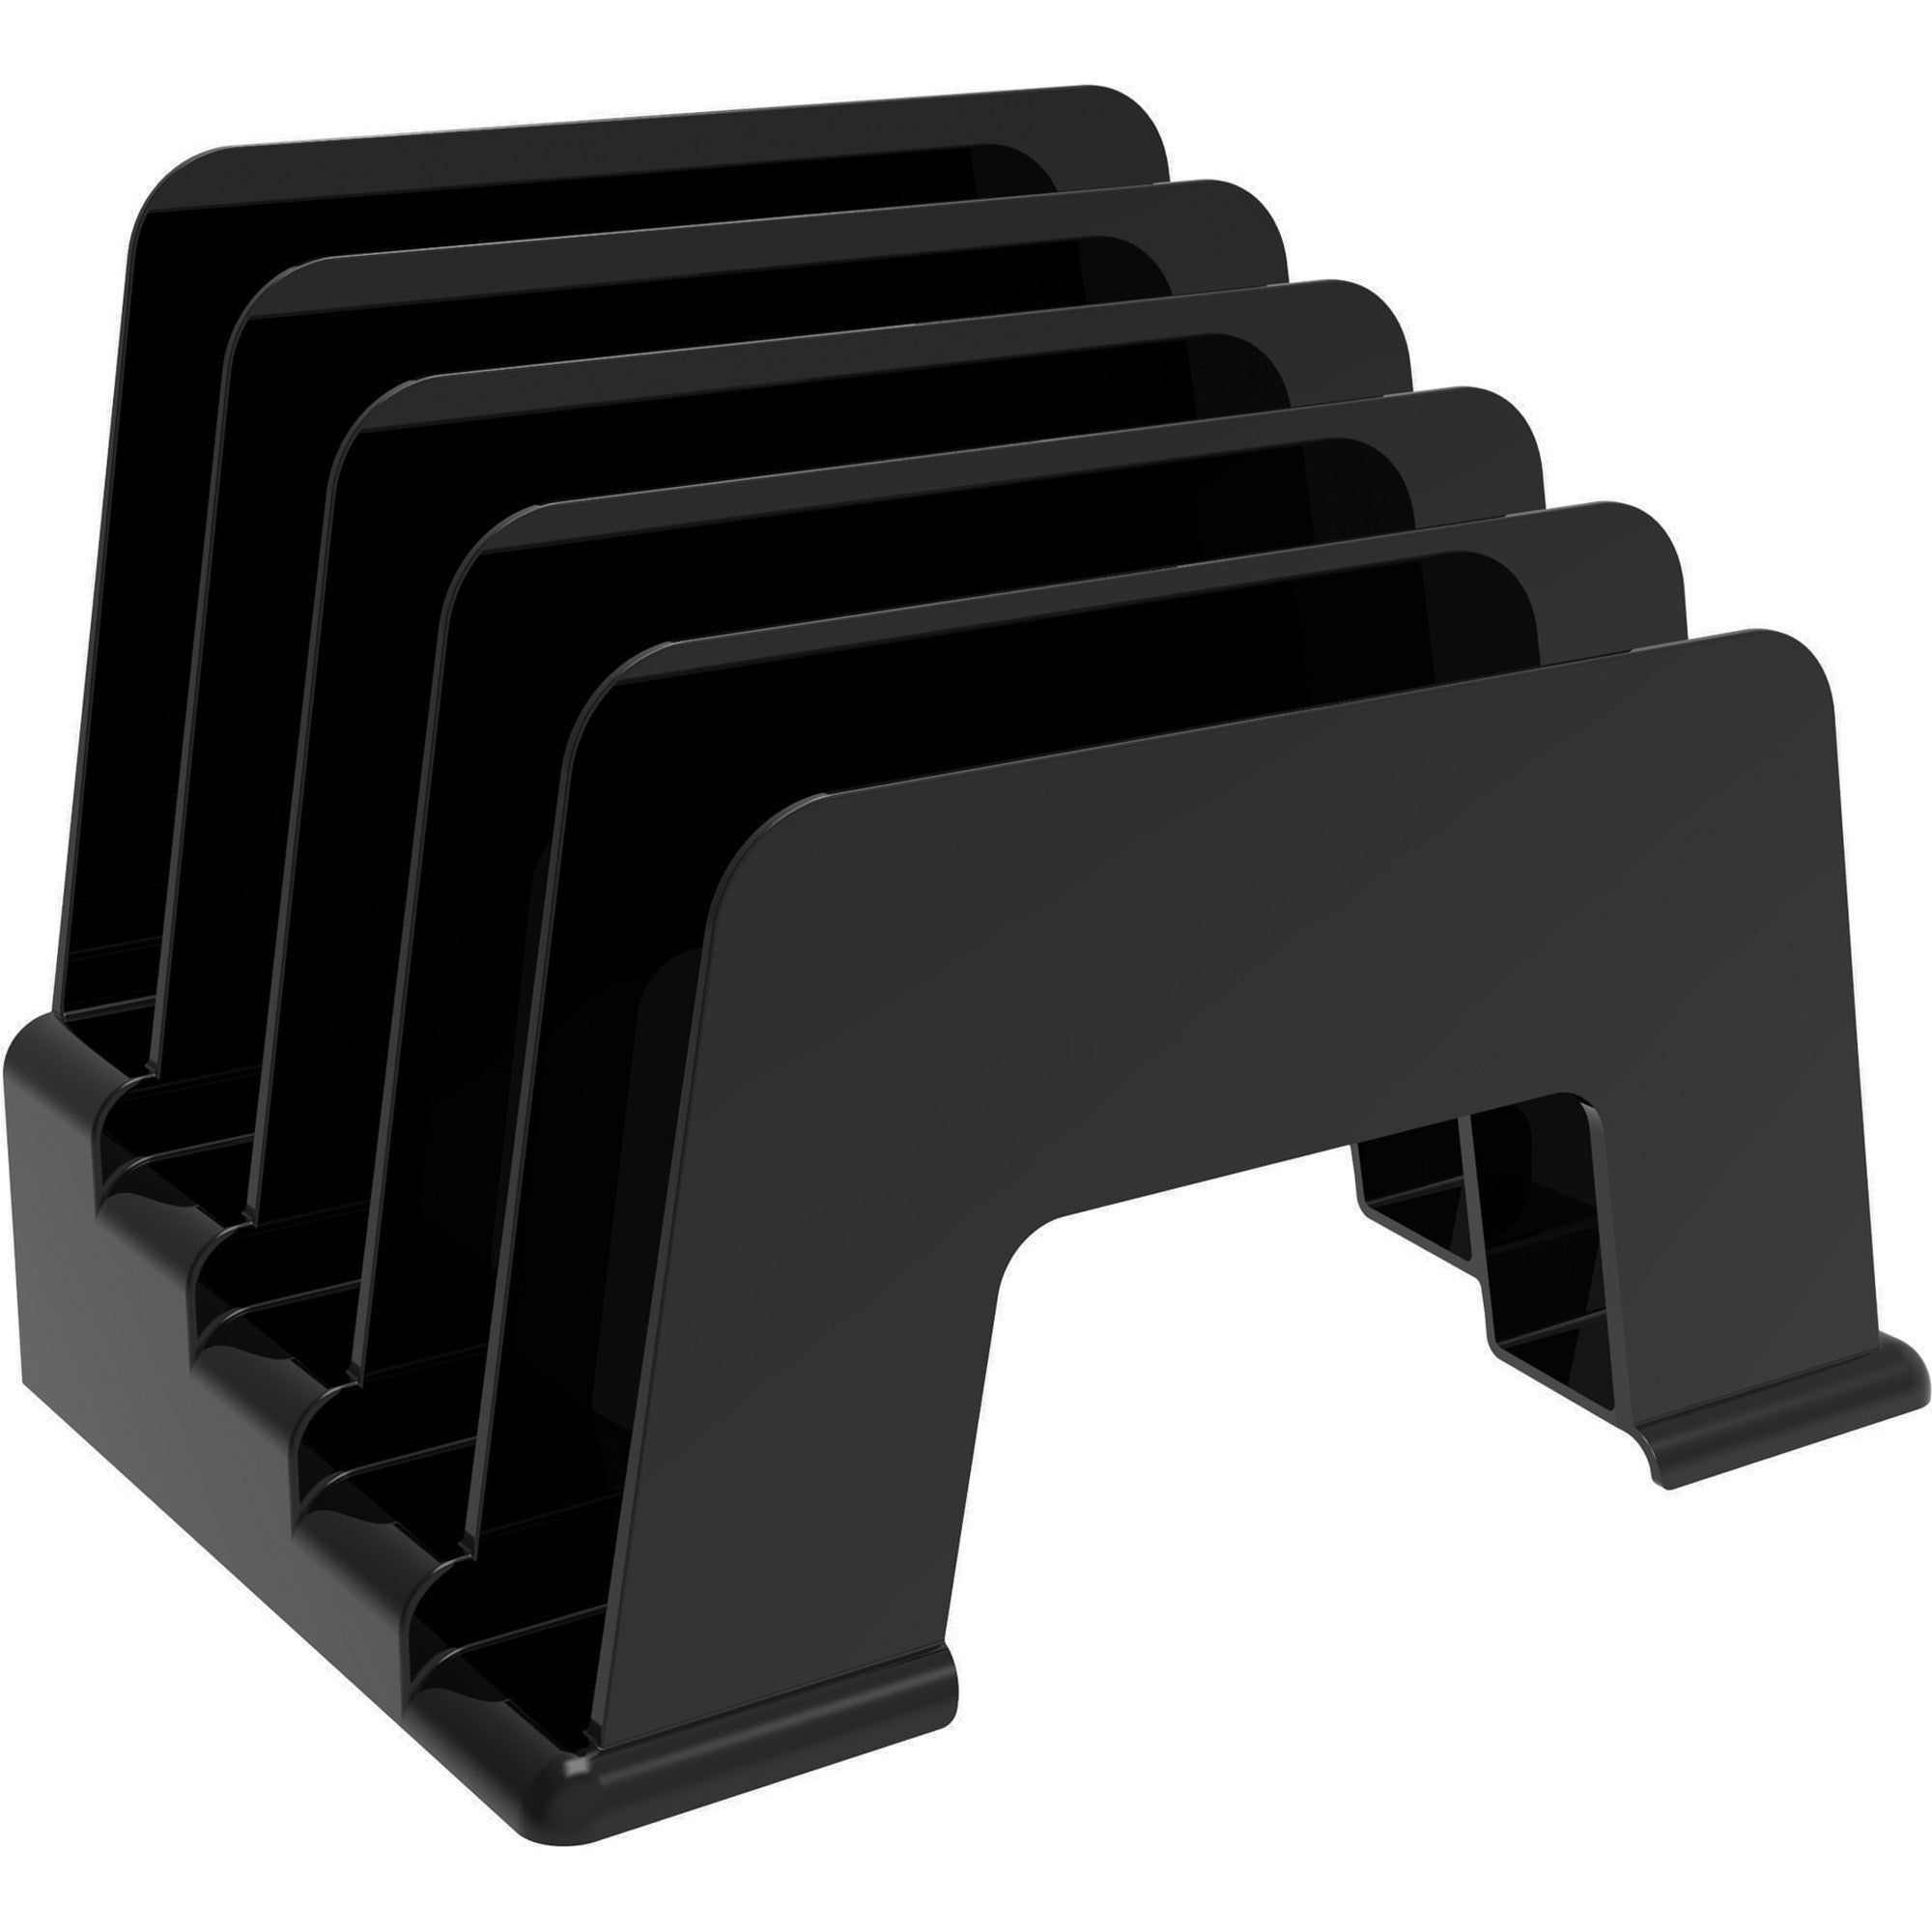 Deflecto Sustainable Office Small Incline Sorter - 5 Compartment(s) - 6" Height x 8" Width x 5.5" DepthDesktop - Sturdy - 30% Recycled - Black - Plastic - 1 Each - 